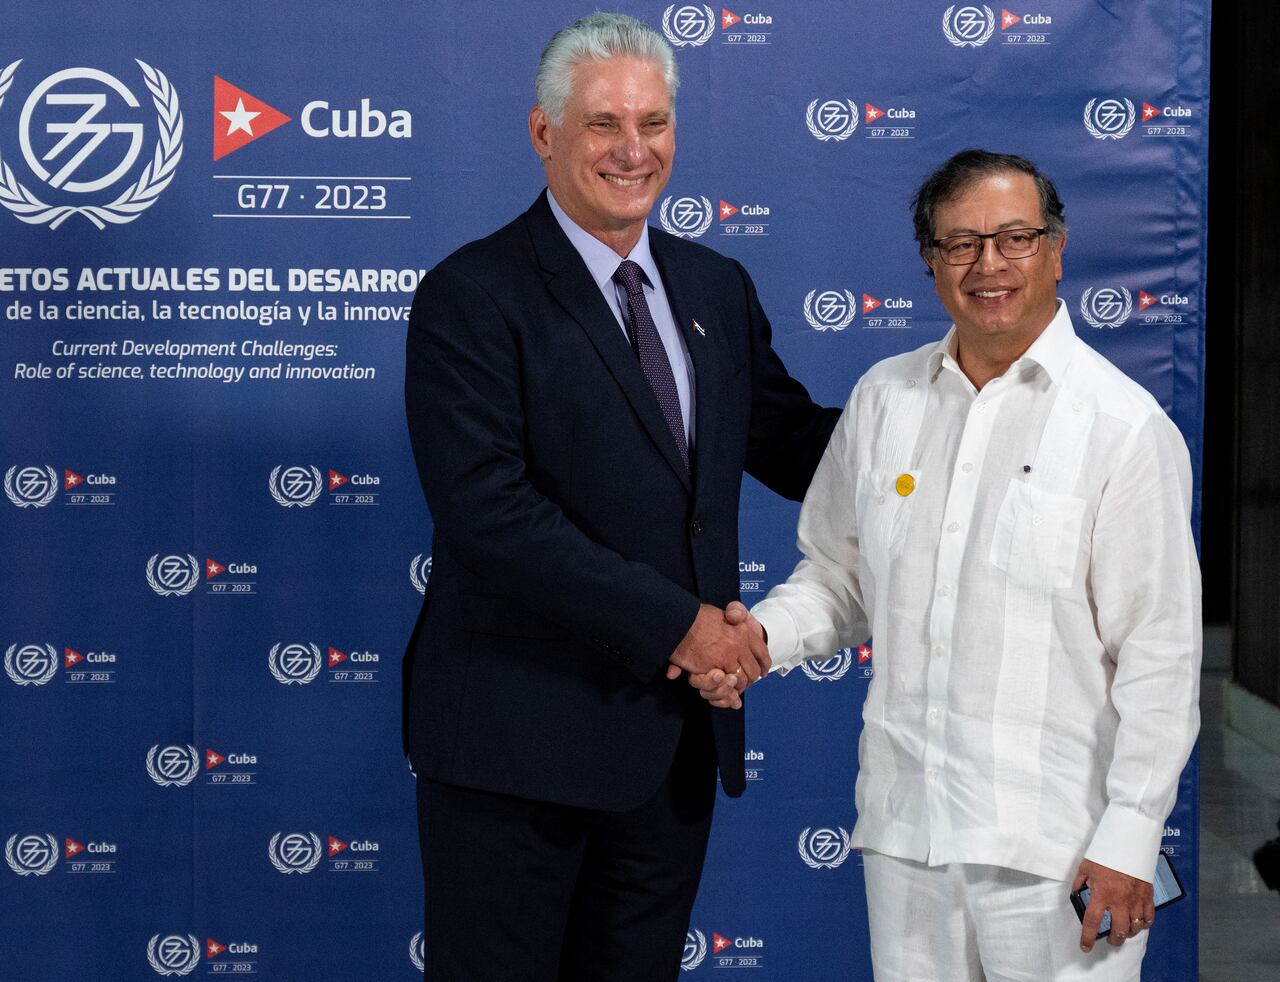 Colombia's President Gustavo Petro (R) is received by Cuba's President Miguel Diaz Canel upon arrival at the Convention Center in Havana on September 15, 2023. The G77+China, a group of developing and emerging countries representing 80 percent of the global population, gathers Friday in Cuba seeking to promote a "new economic world order" amid warnings of growing polarization. (Photo by Yamil LAGE / POOL / AFP)